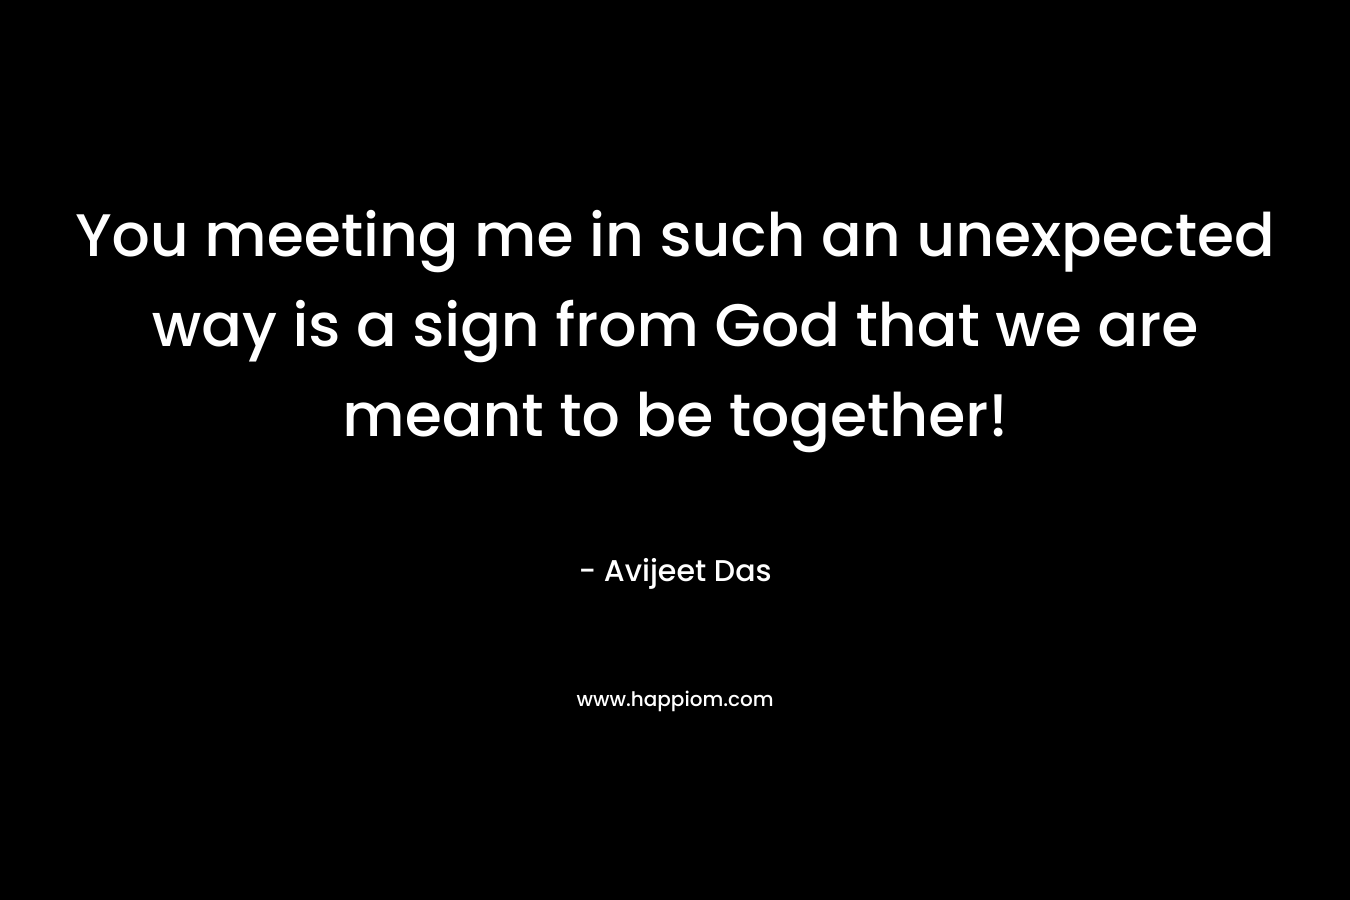 You meeting me in such an unexpected way is a sign from God that we are meant to be together!